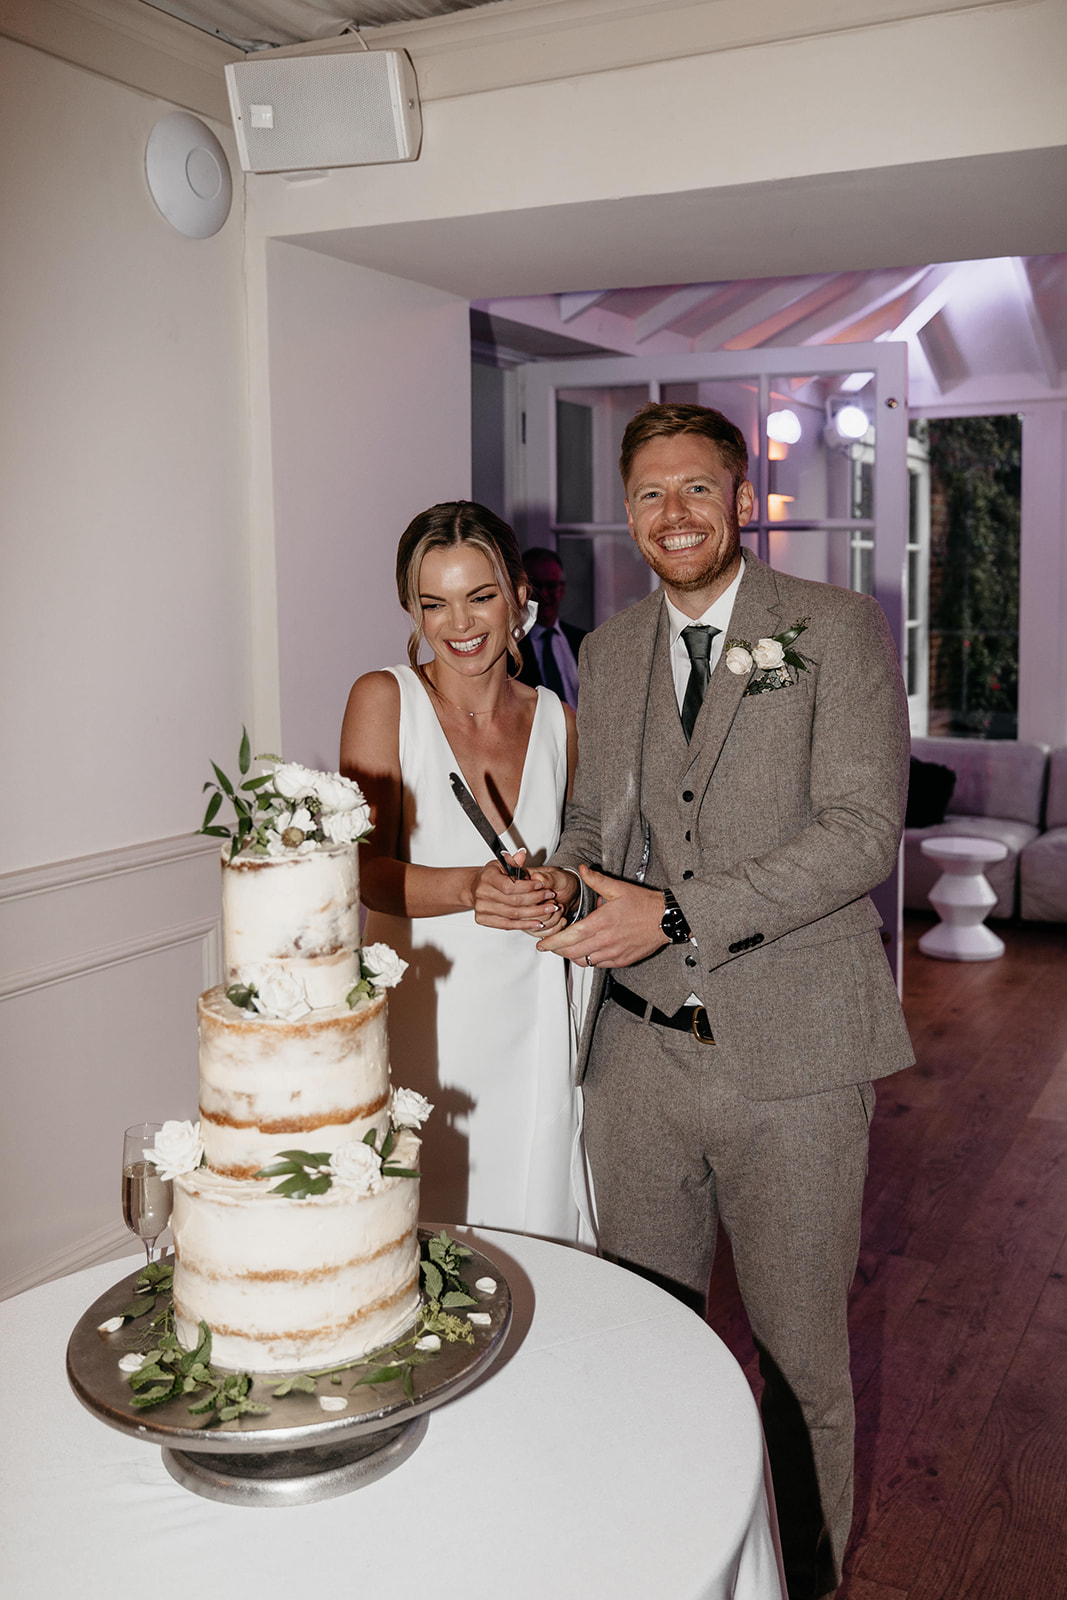 A bride and groom stand behind a three tiered wedding cake holding a cake knife getting ready to cut their cake